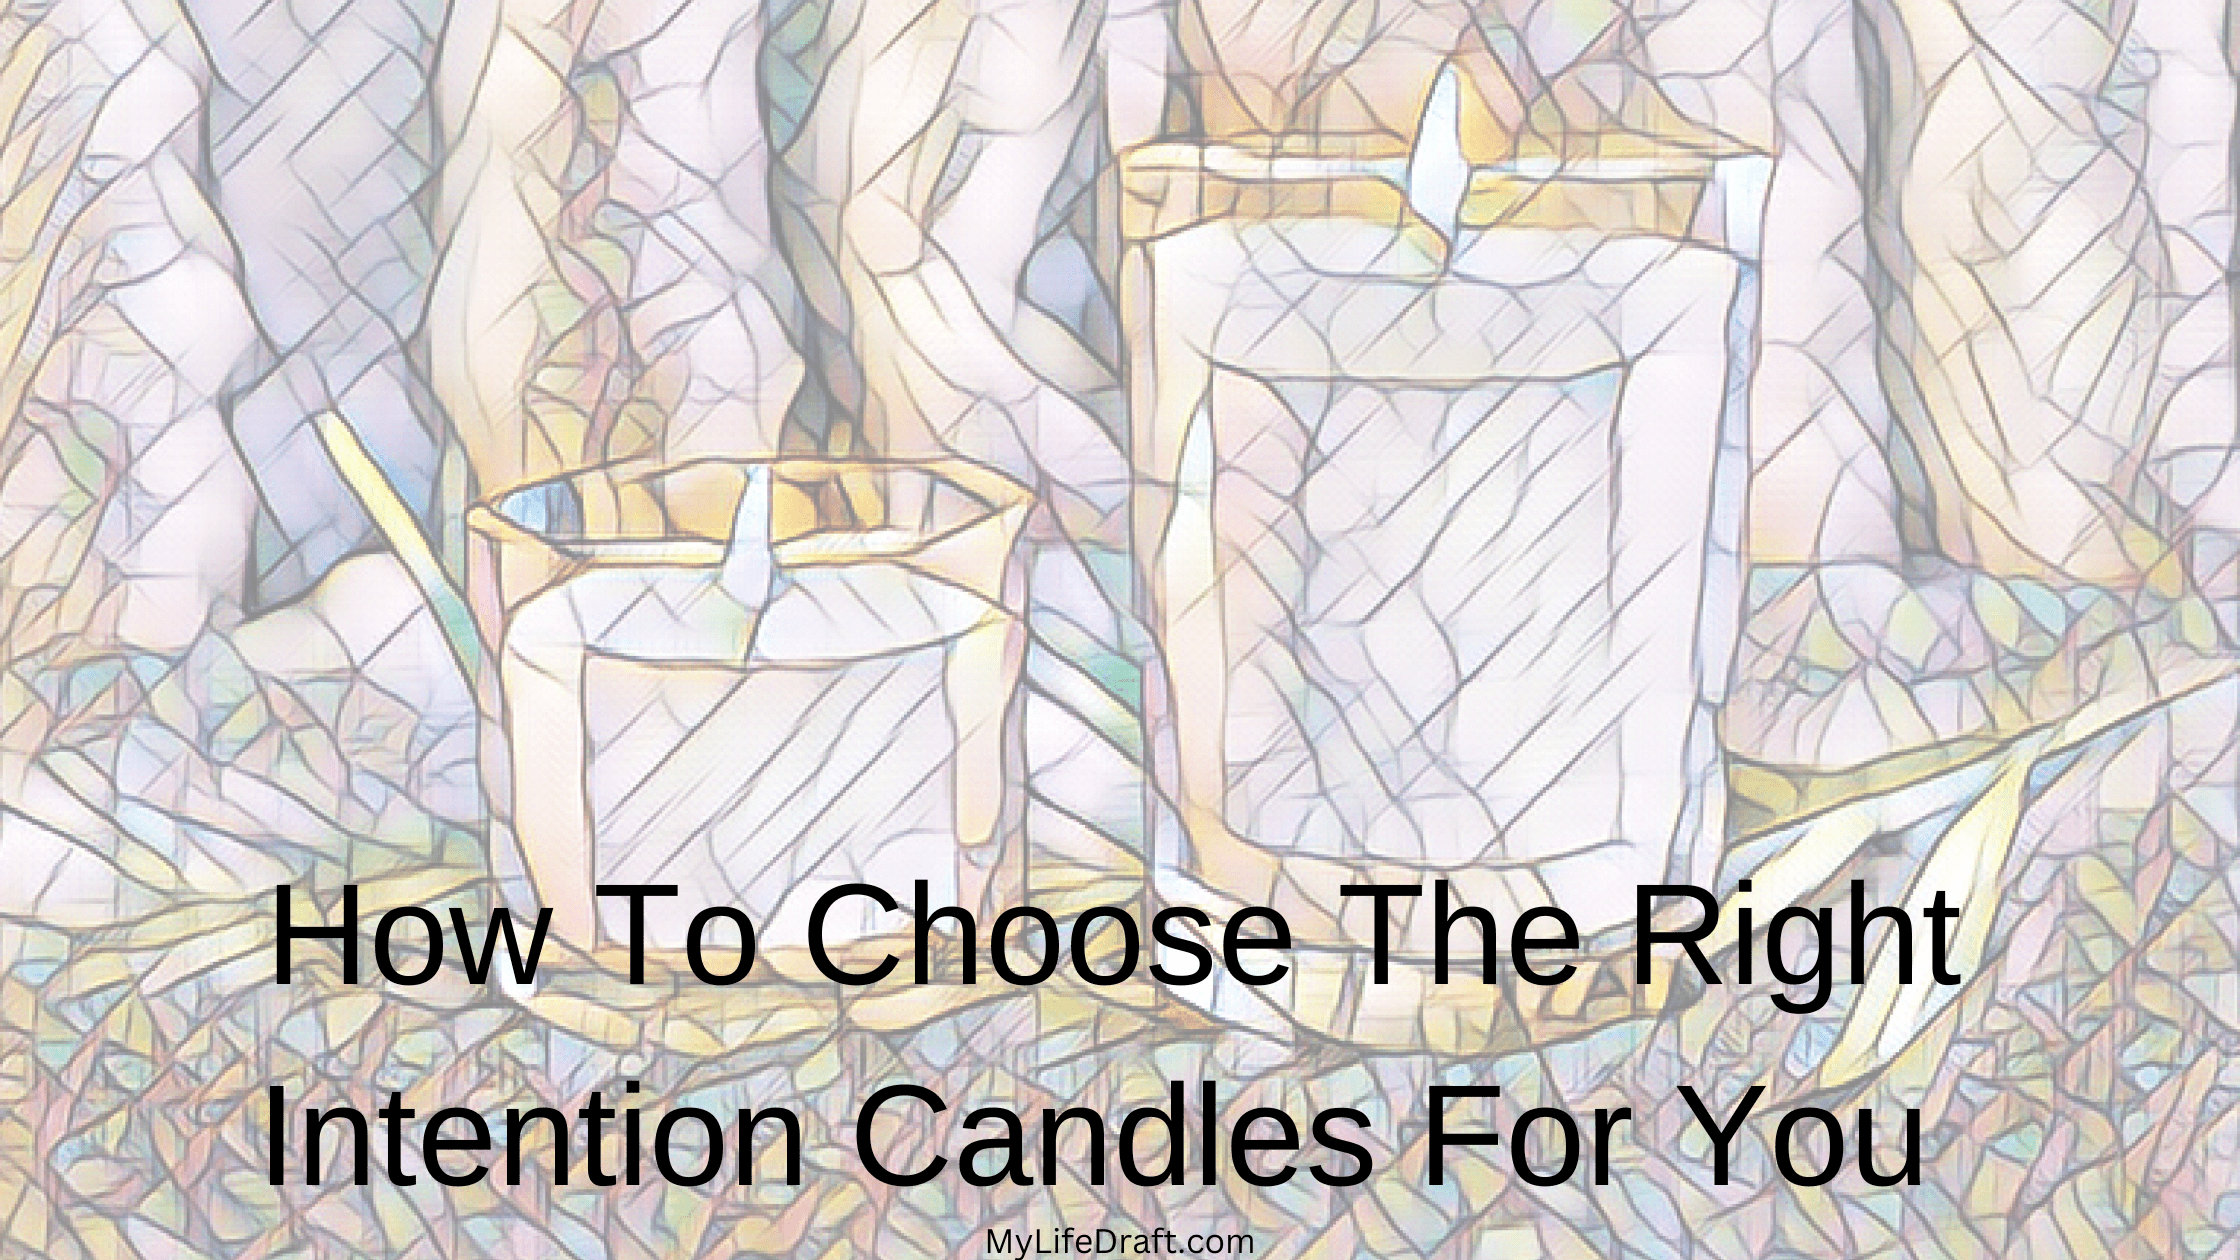 How to Choose the Right Intention Candles for You